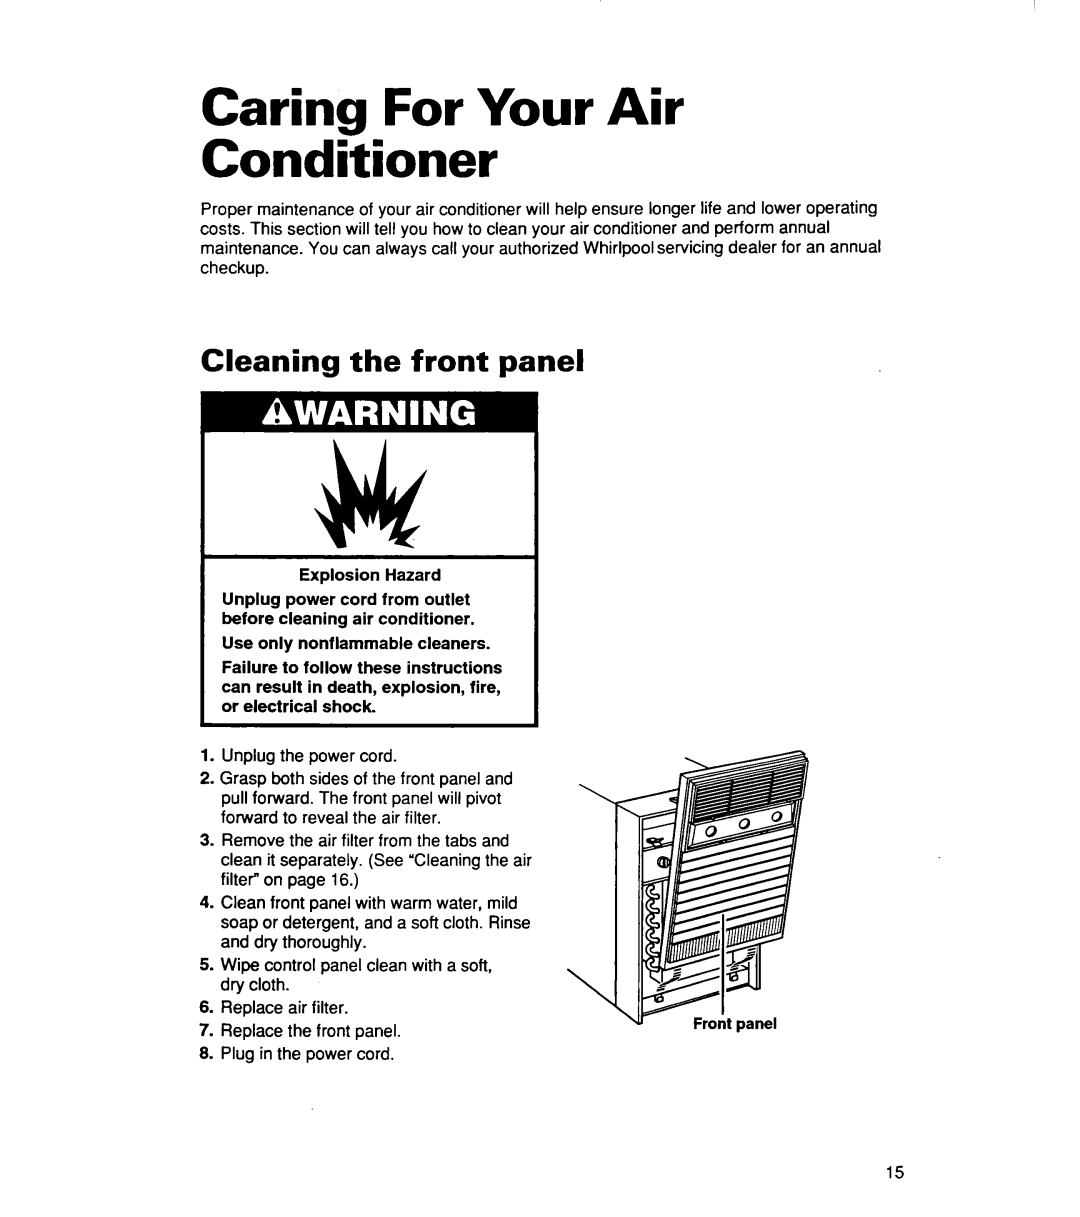 Whirlpool ACSl02XE, ACS072XE warranty Caring For Your Air Conditioner, Cleaning the front panel 